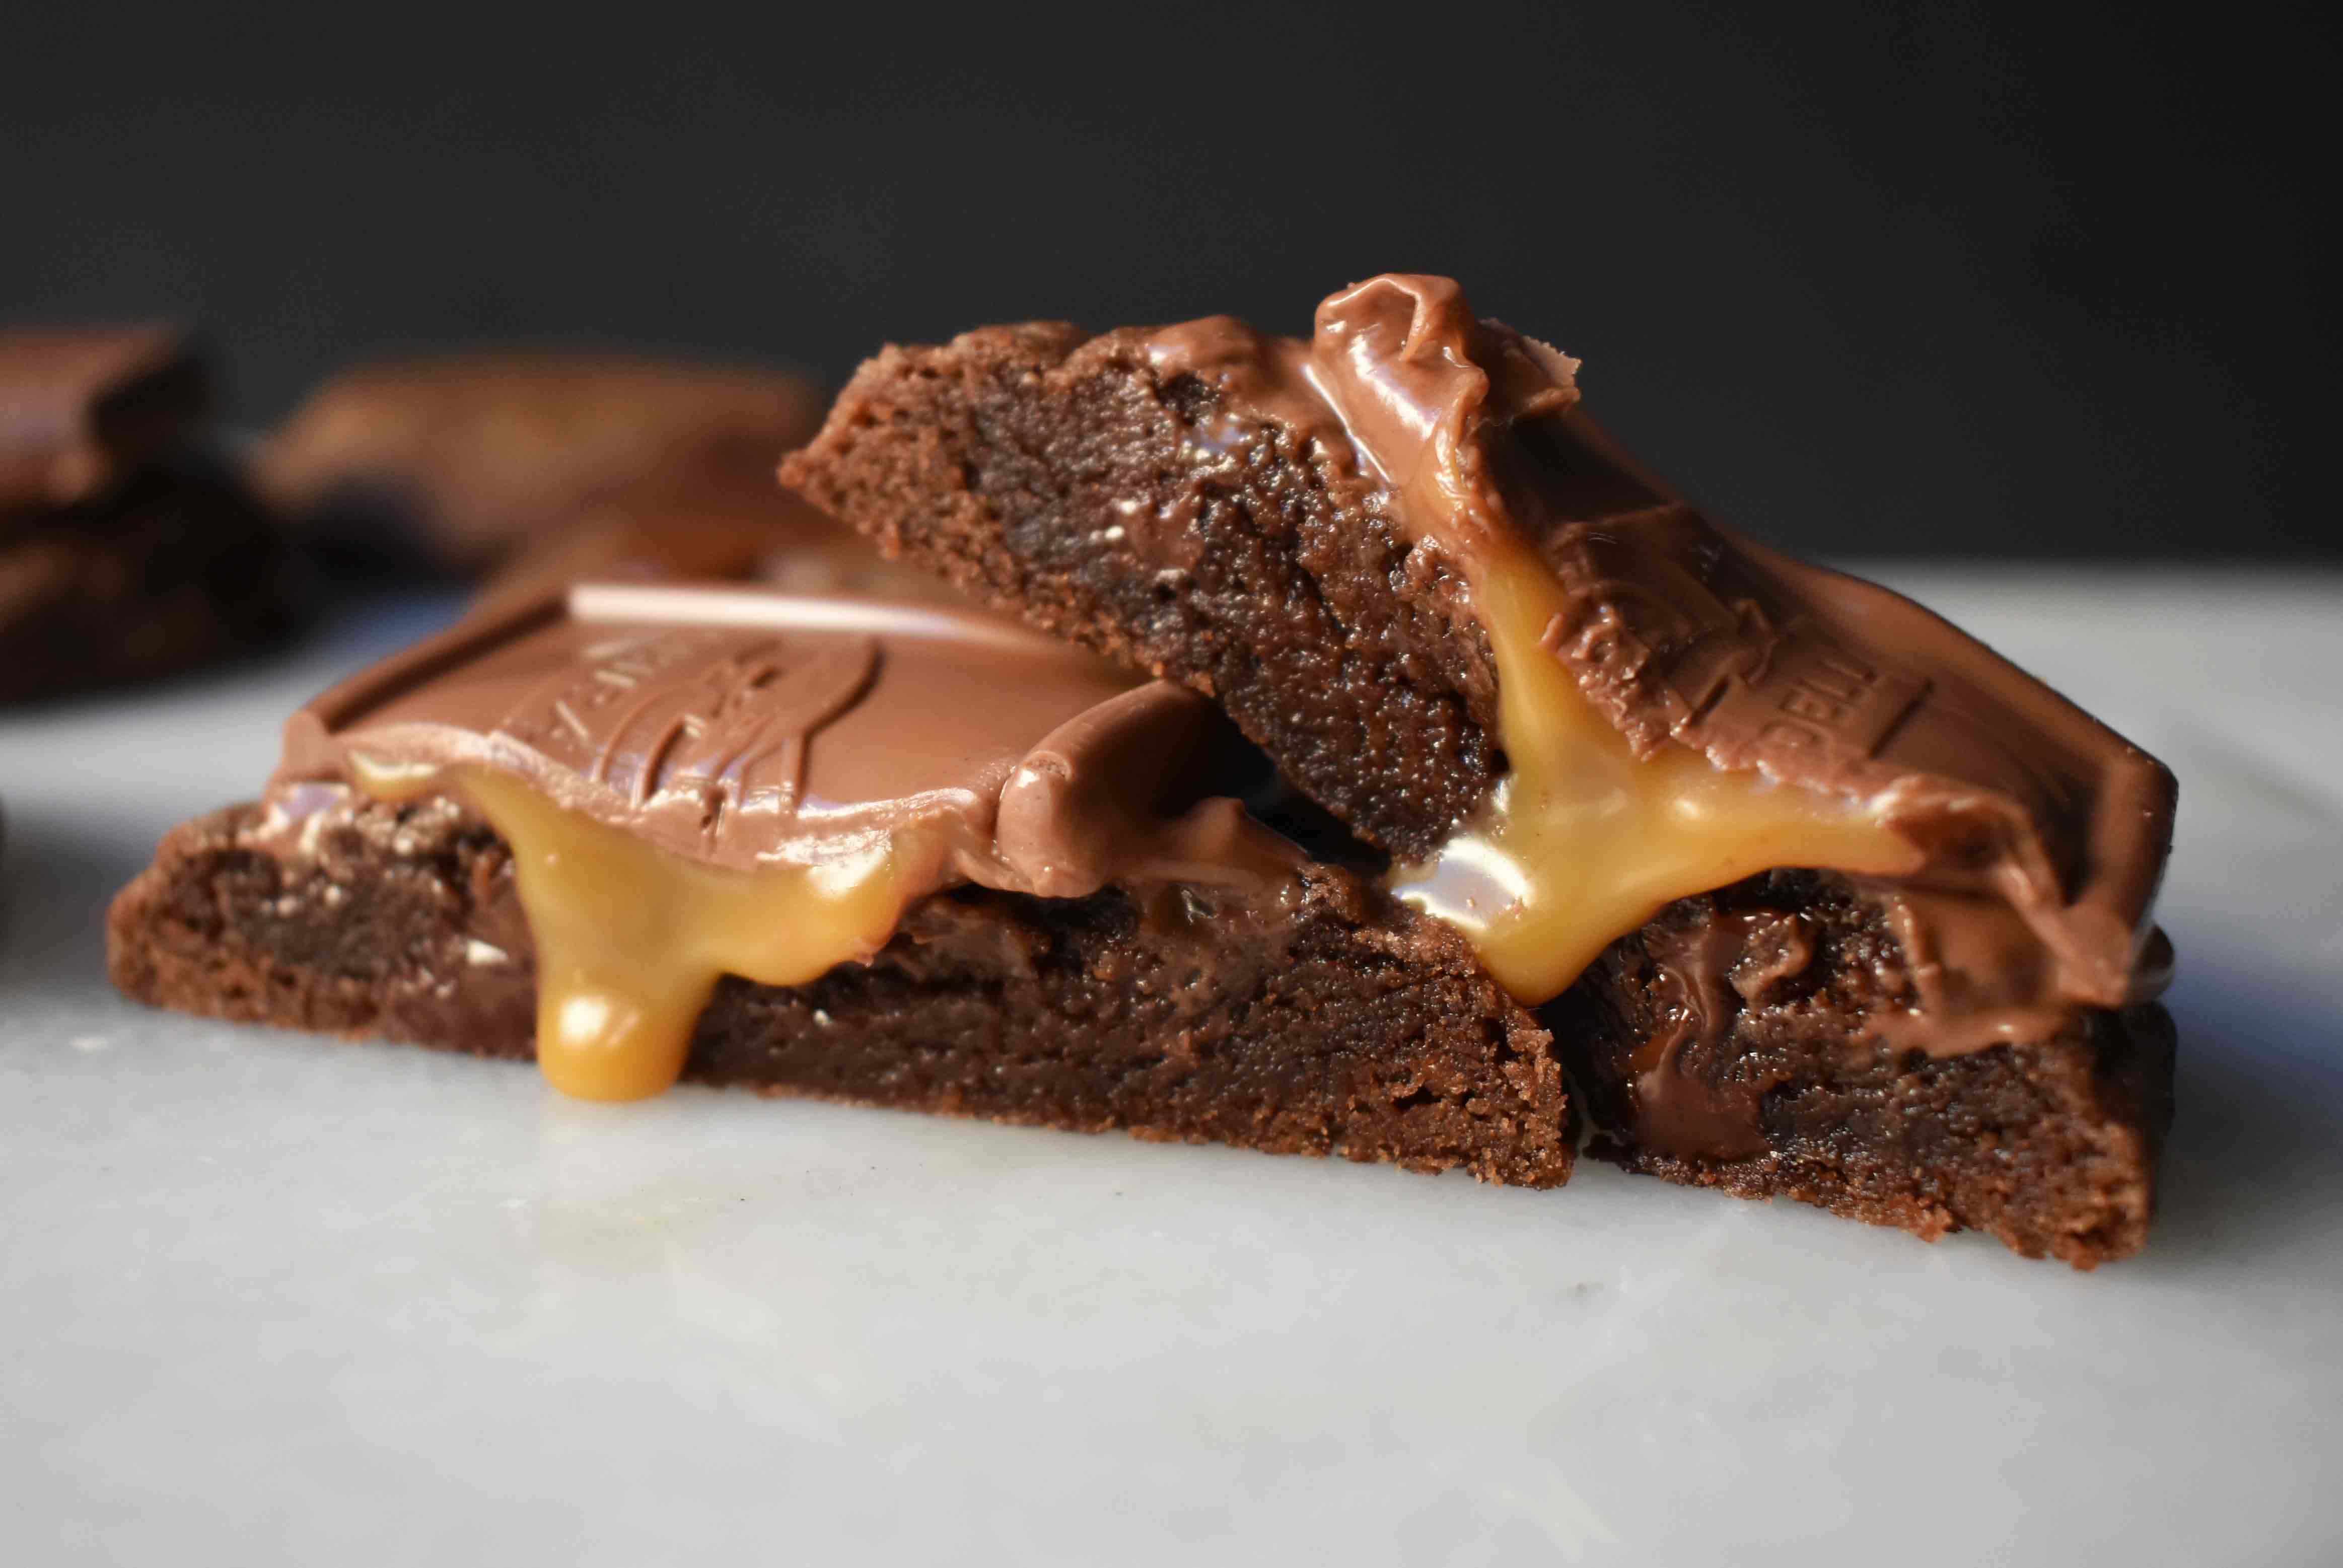 Ghirardelli Squares Chocolate Cookies. Double Chocolate Cookies topped with a creamy Ghirardelli square chocolate. Milk Chocolate Caramel, Dark Chocolate Mint,or Peppermint Bark Ghirardelli Squares are placed on top of this decadent cookie. A crowd favorite!